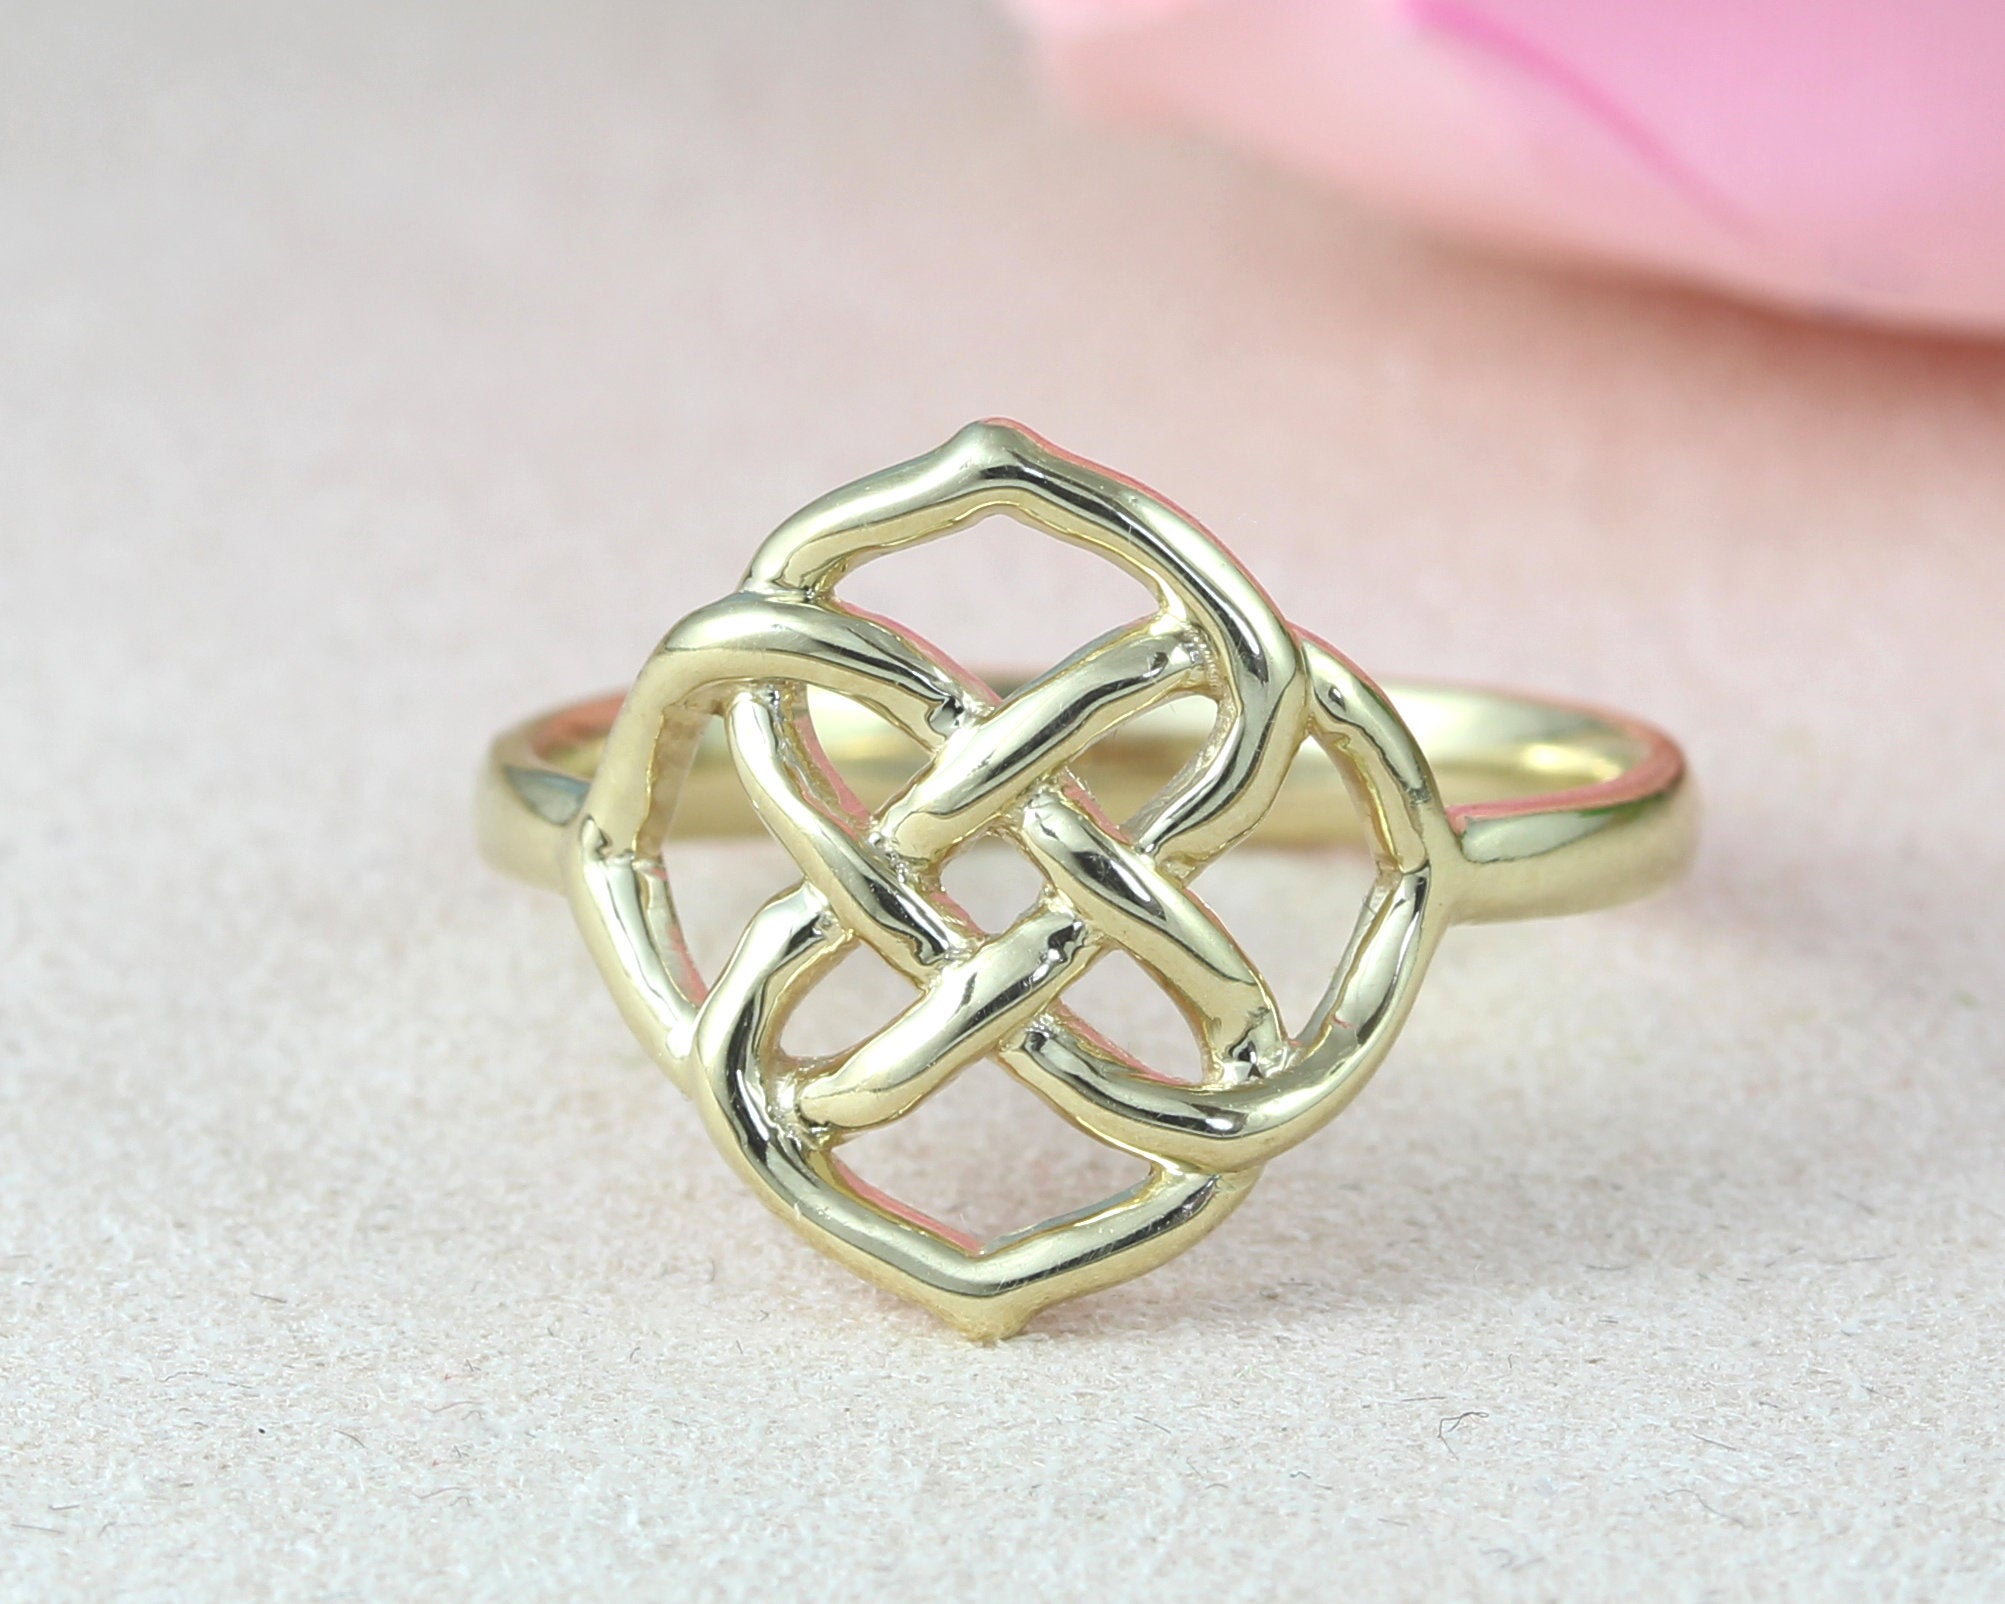 Jewelry Friends Love Knot Ring Gold Plated Diamond Love Knot Promise Ring  Twisted Rope For Women